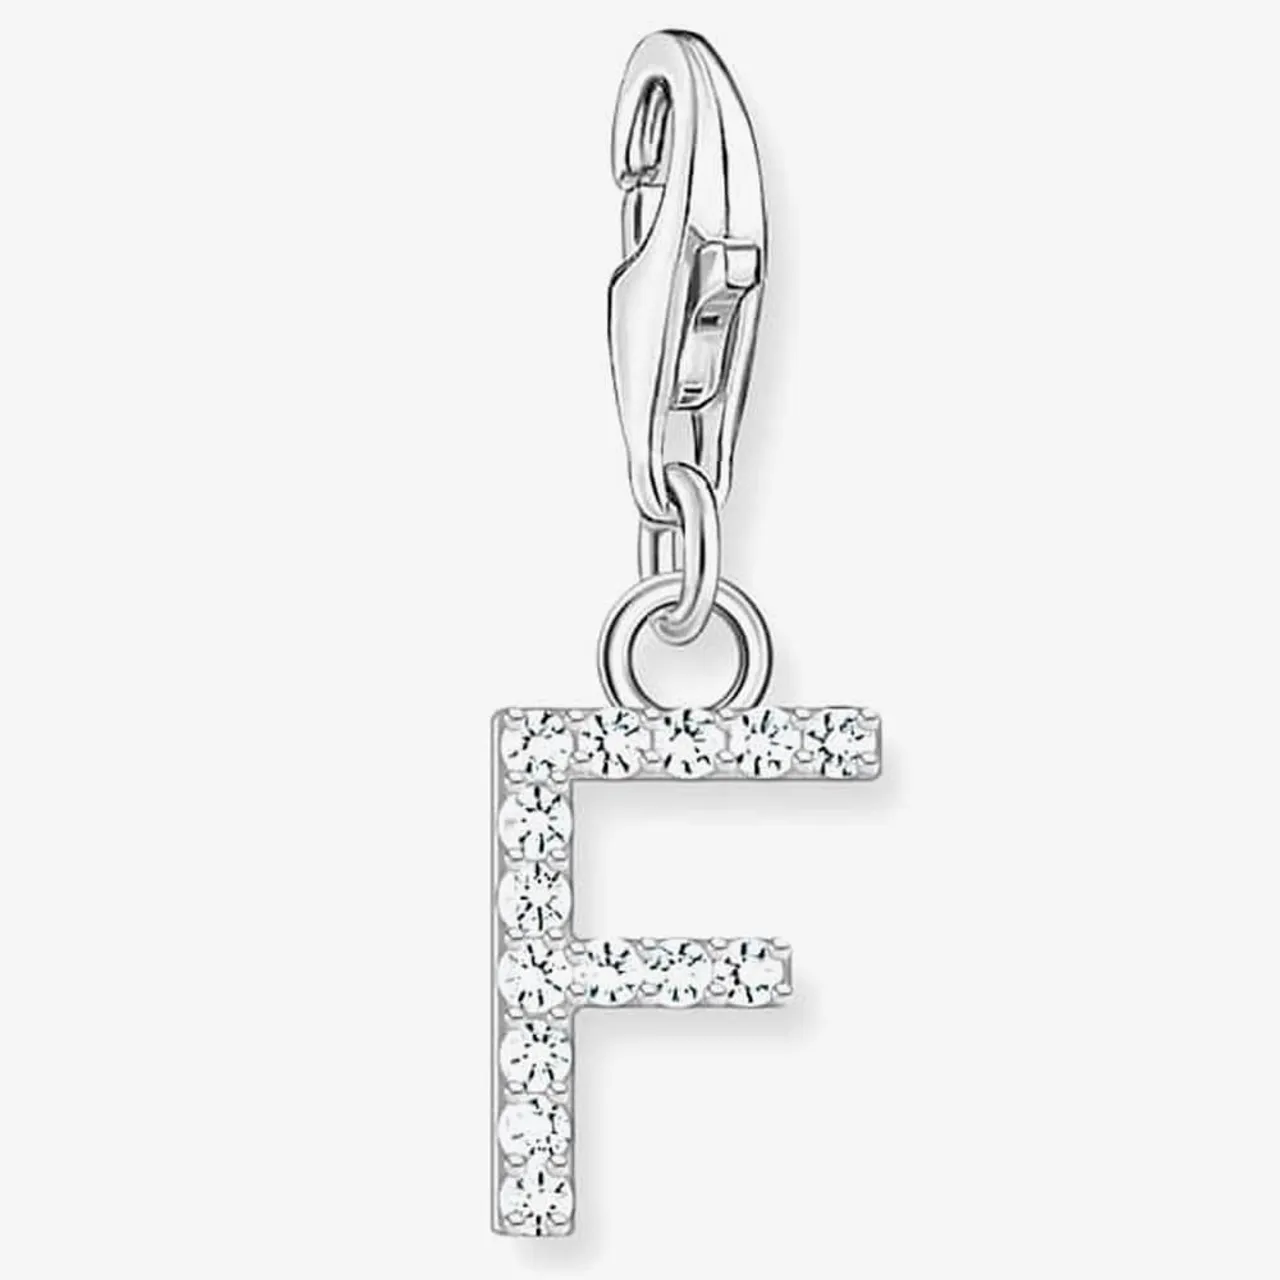 THOMAS SABO Silver Cubic Zirconia Letter F Charm 1946-051-14